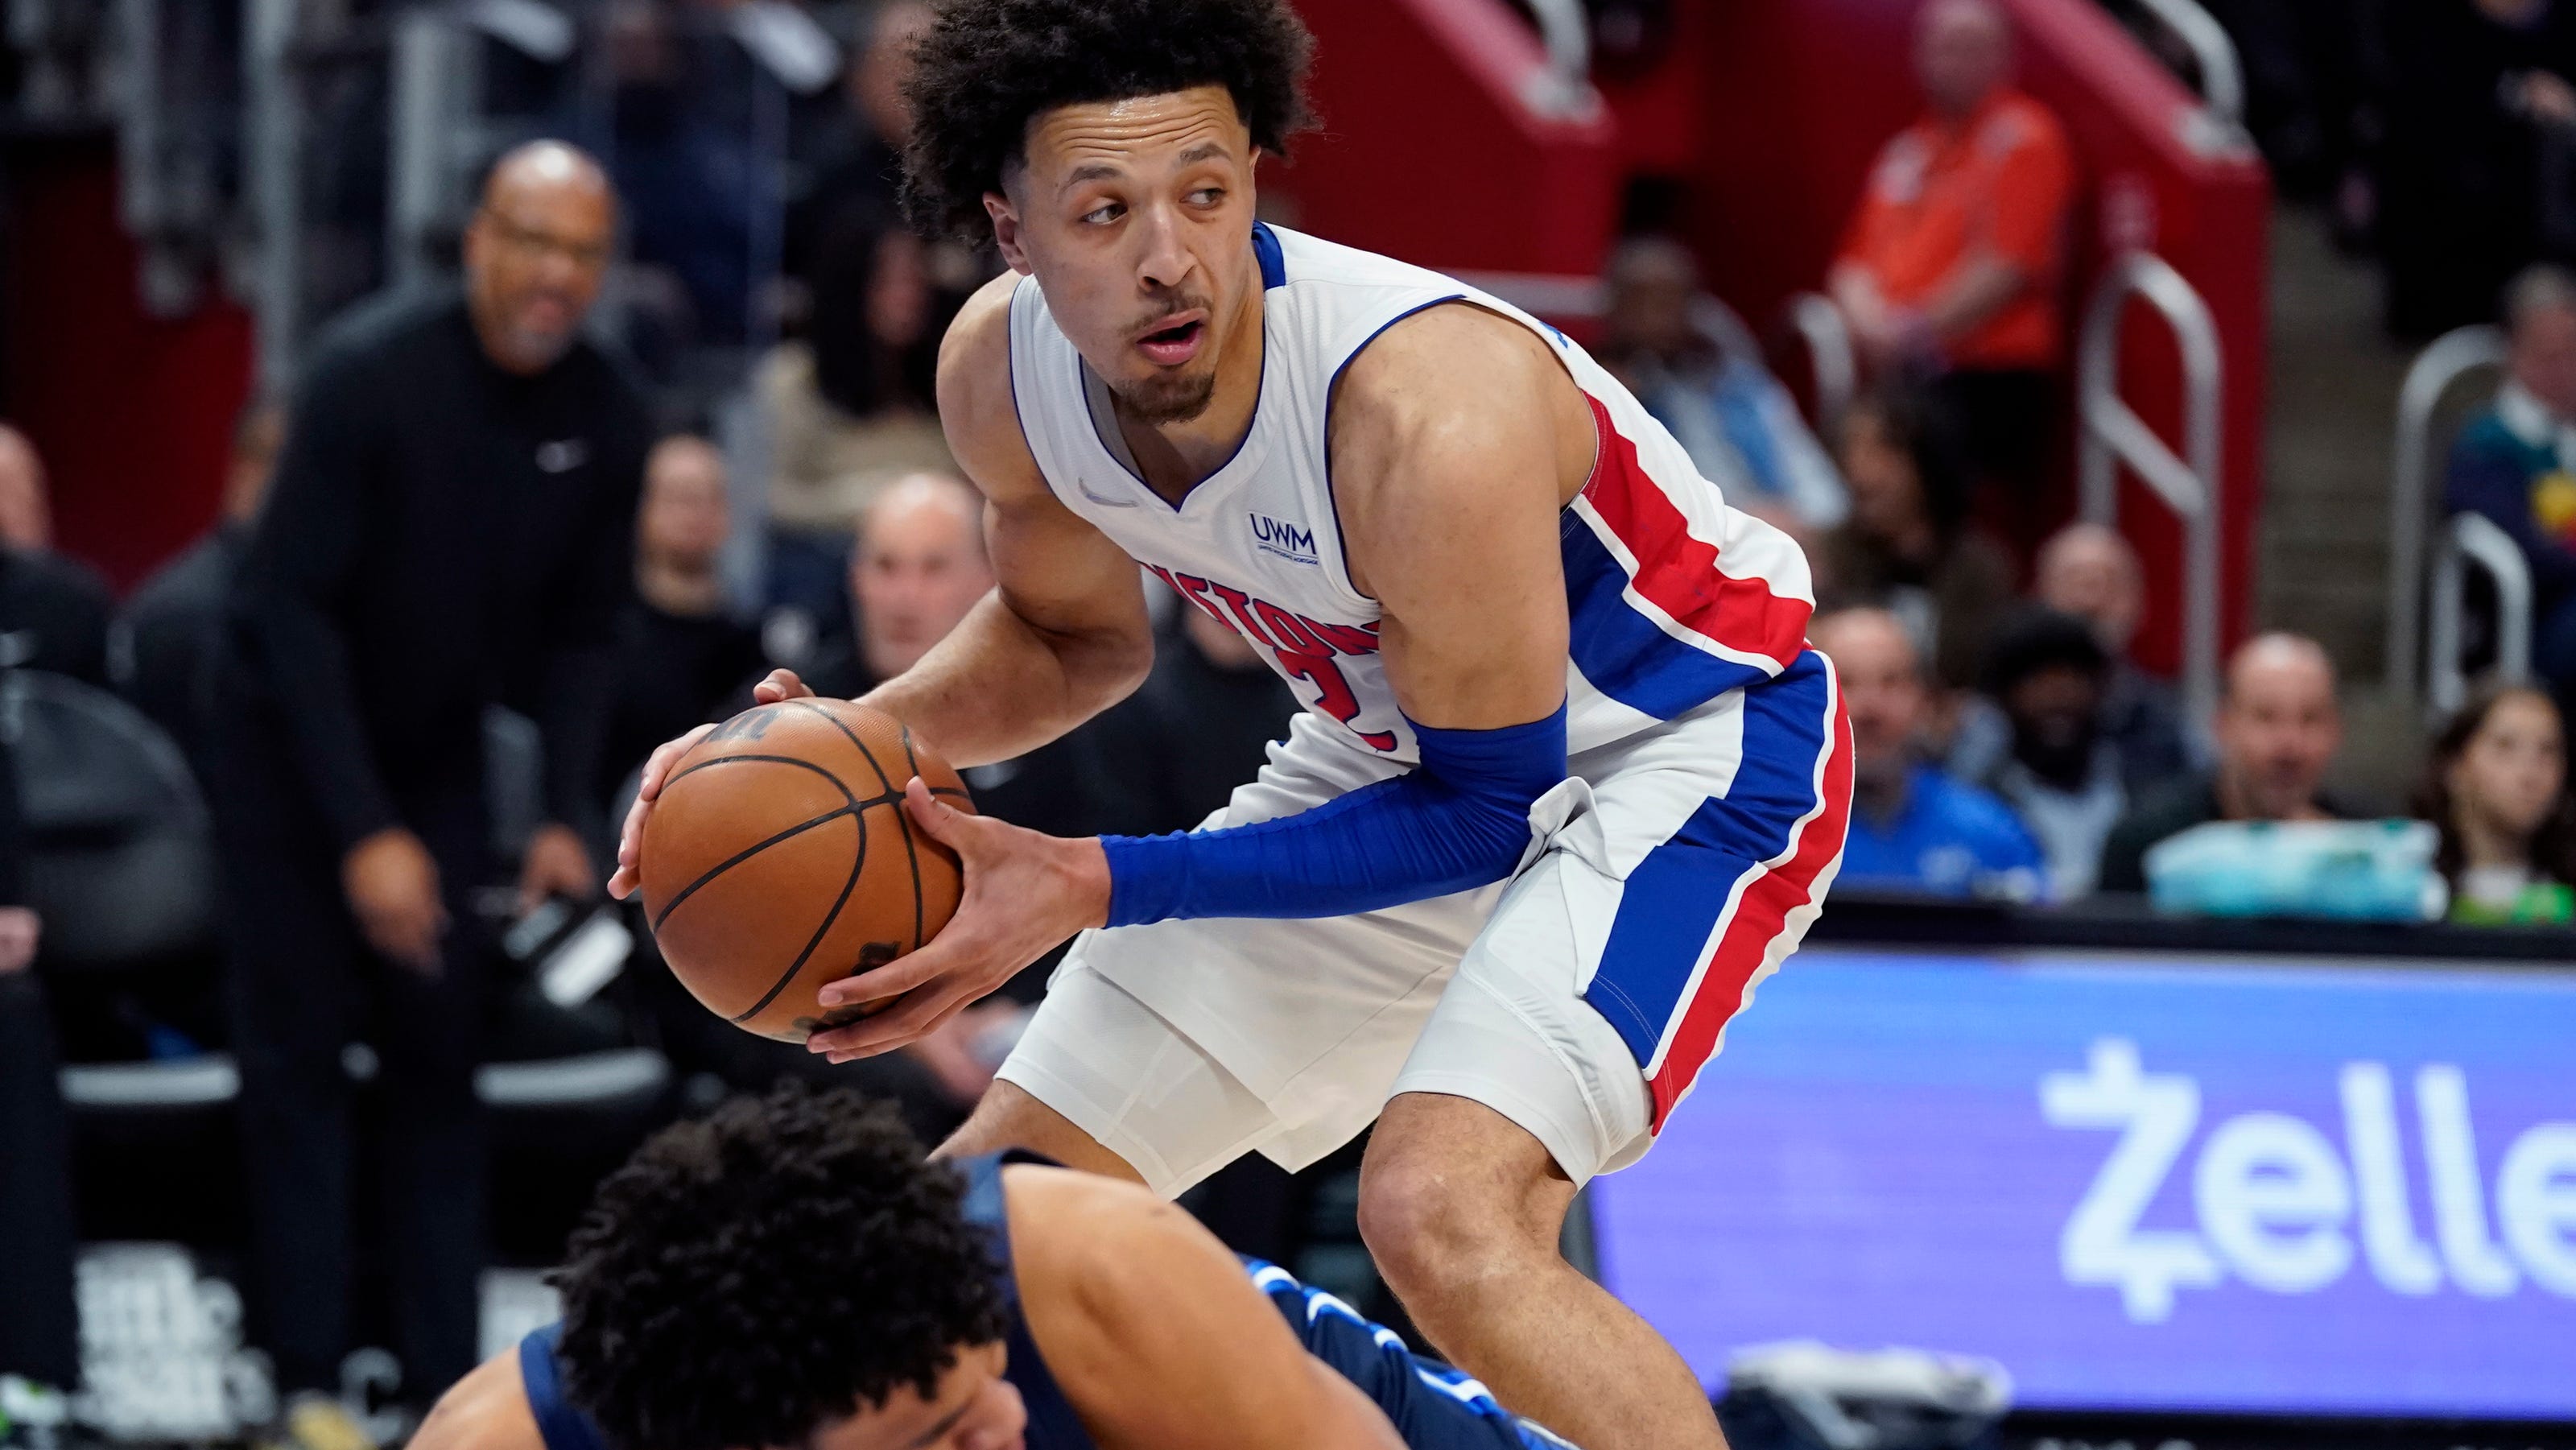 Pistons' guard Cade Cunningham has stress fracture, out indefinitely